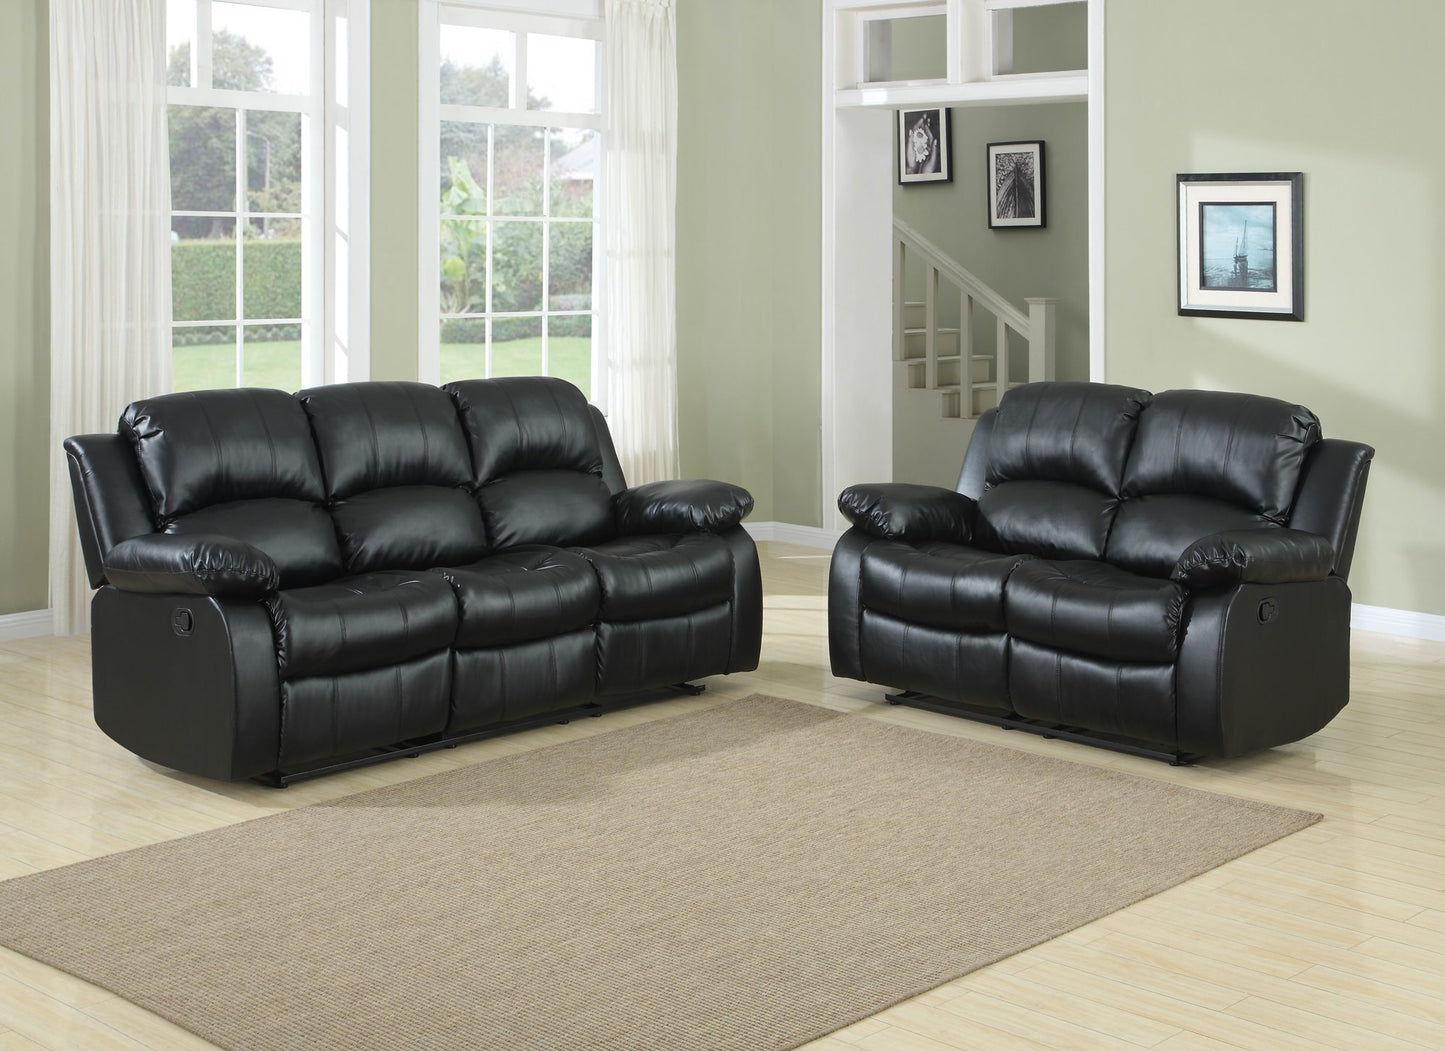 Homelegance Cranley Double Reclining Sofa in Leather - Black